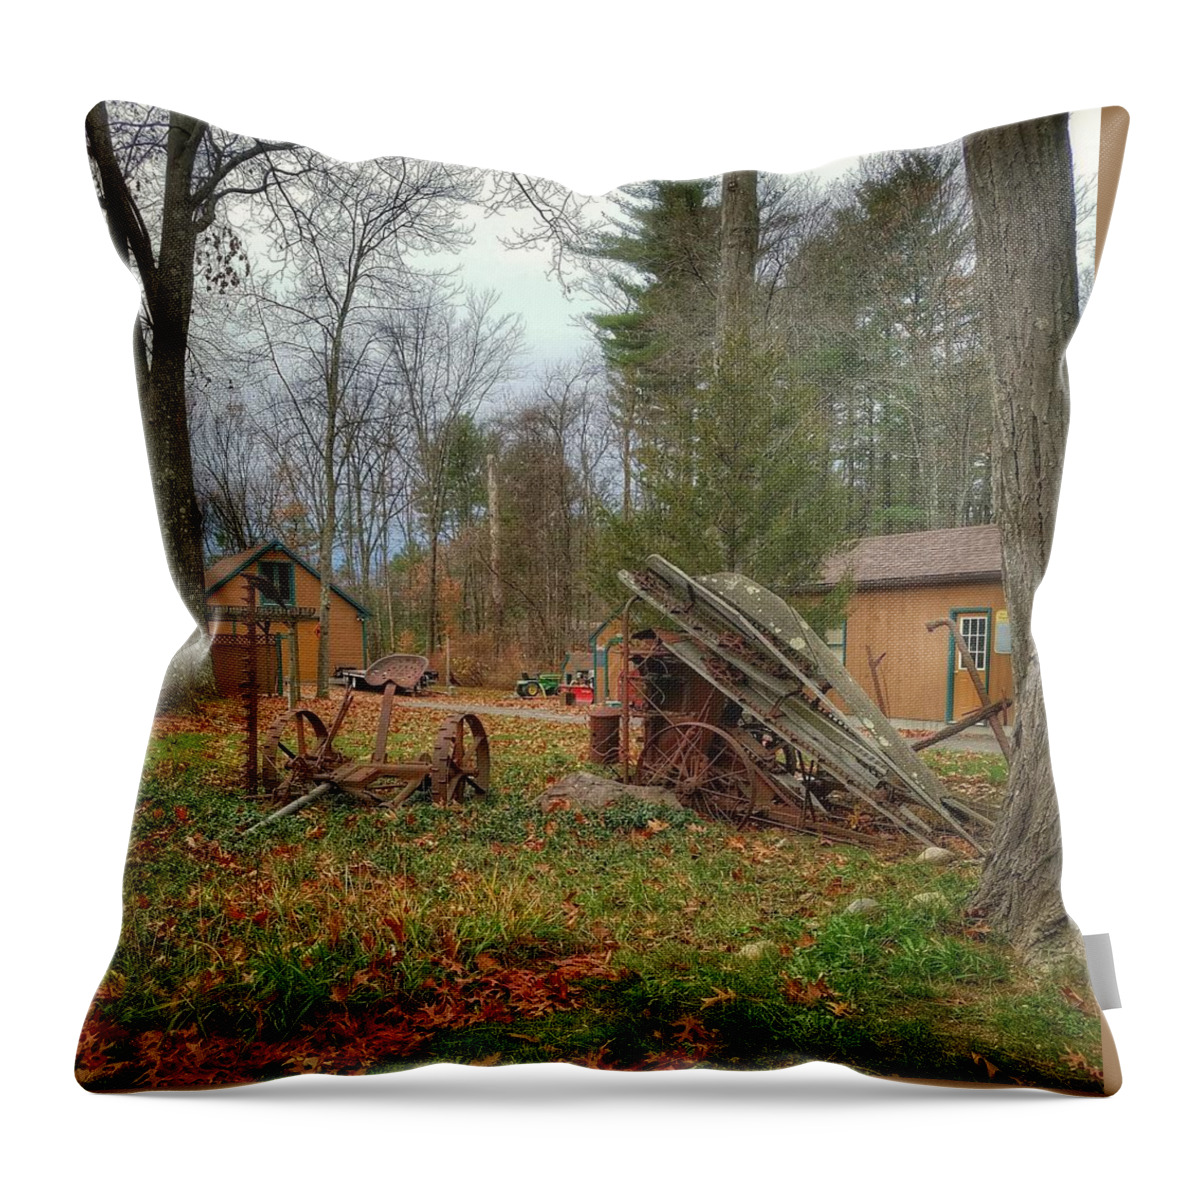 Rust Throw Pillow featuring the photograph The Old Field Tools by Mary Capriole